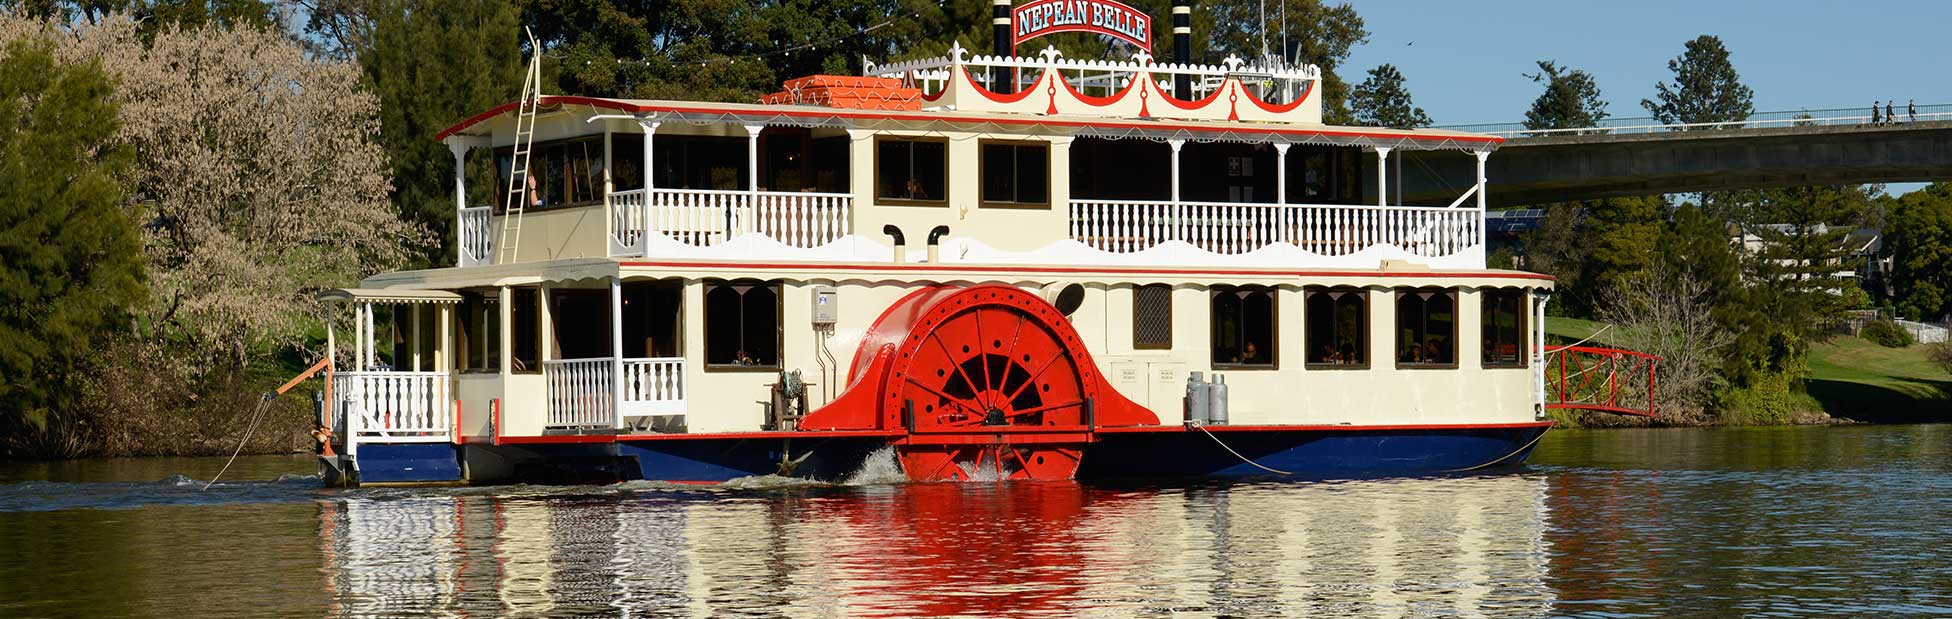 Photo of the Nepean Belle ship on the Nepean River